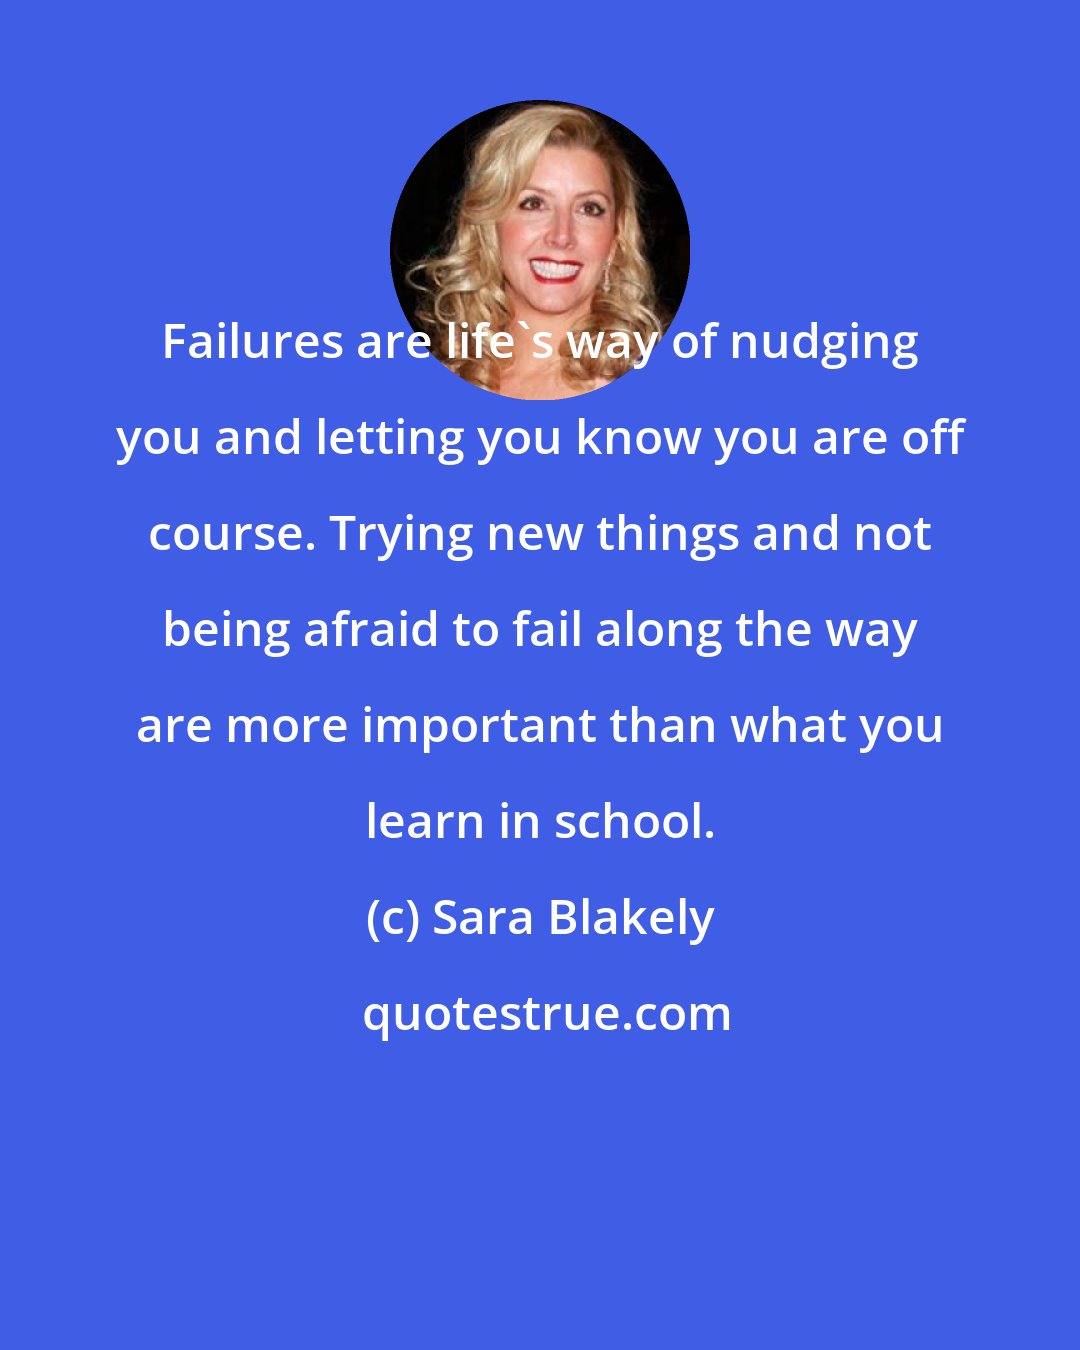 Sara Blakely: Failures are life's way of nudging you and letting you know you are off course. Trying new things and not being afraid to fail along the way are more important than what you learn in school.